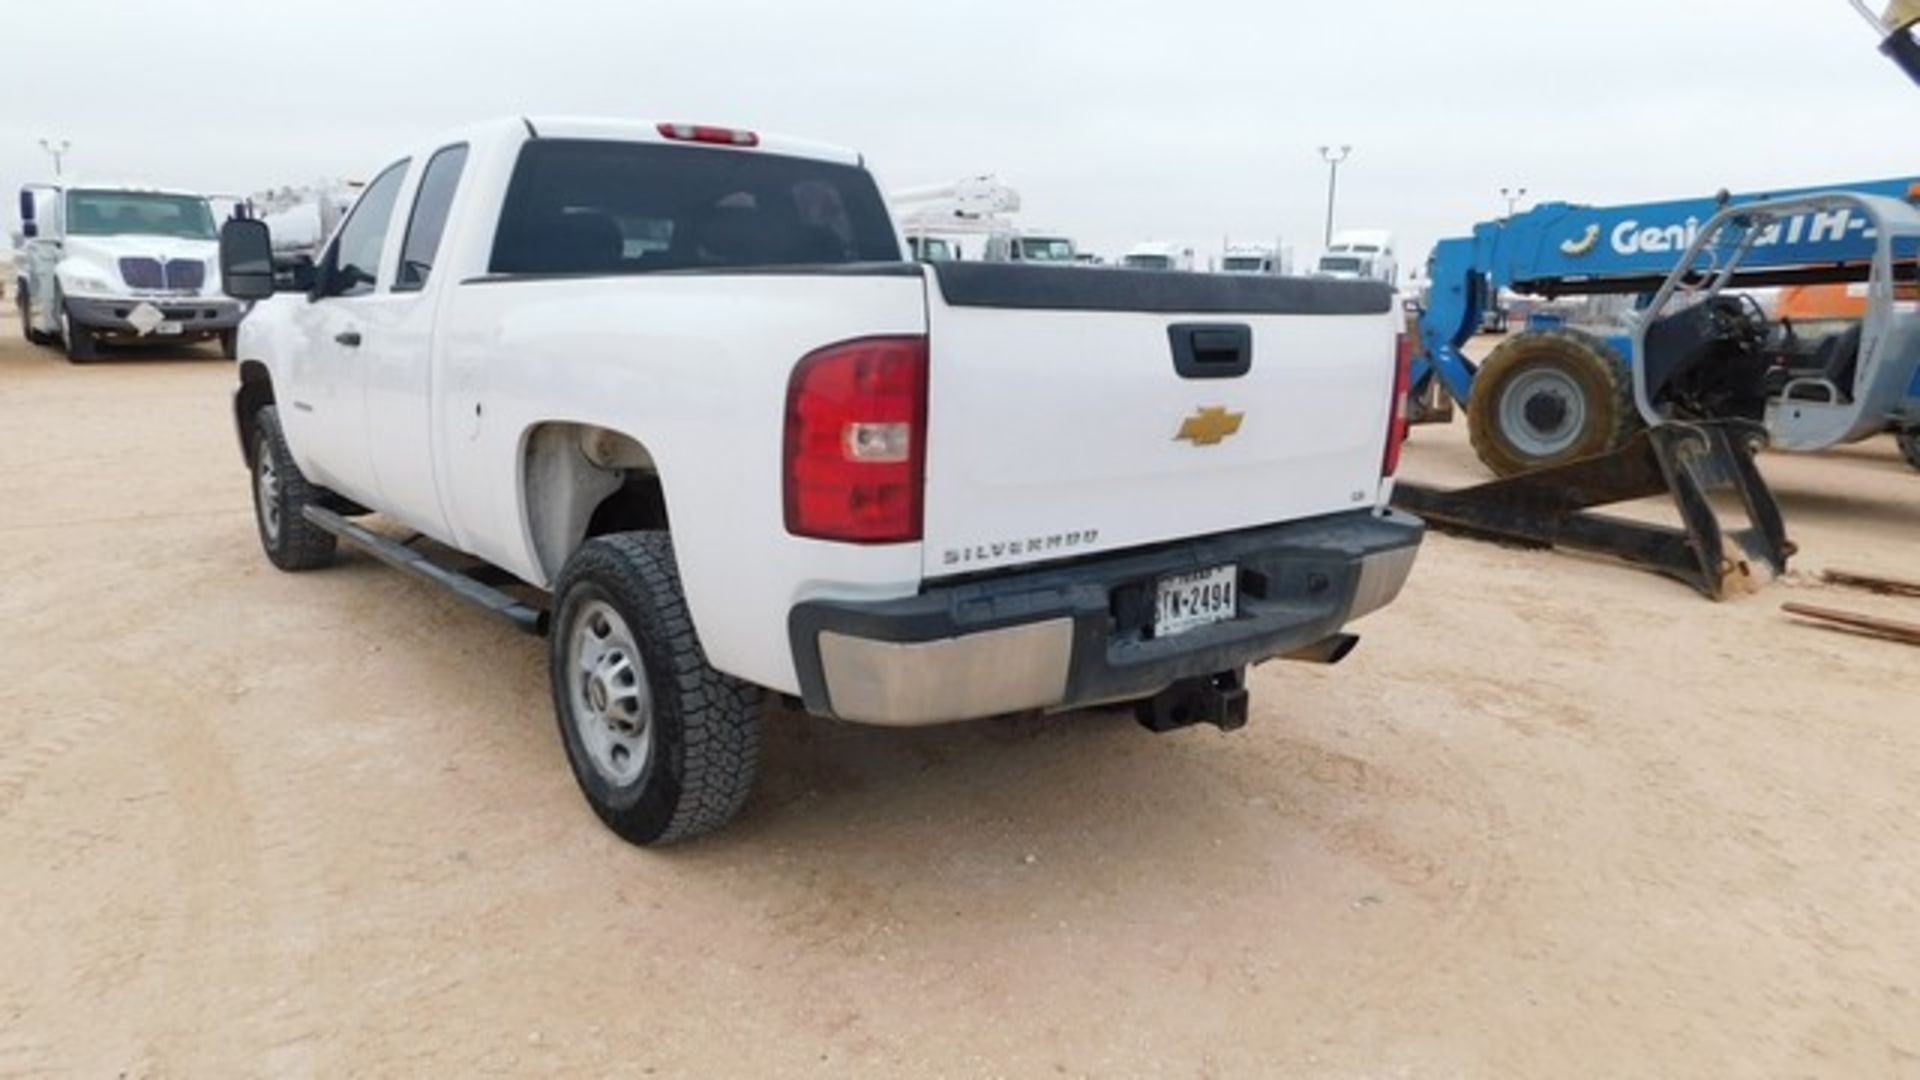 Located in YARD 1 - Midland, TX (X) 2013 CHEVROLET 2500 HD EXT CAB PICK UP, P/B - Image 3 of 9